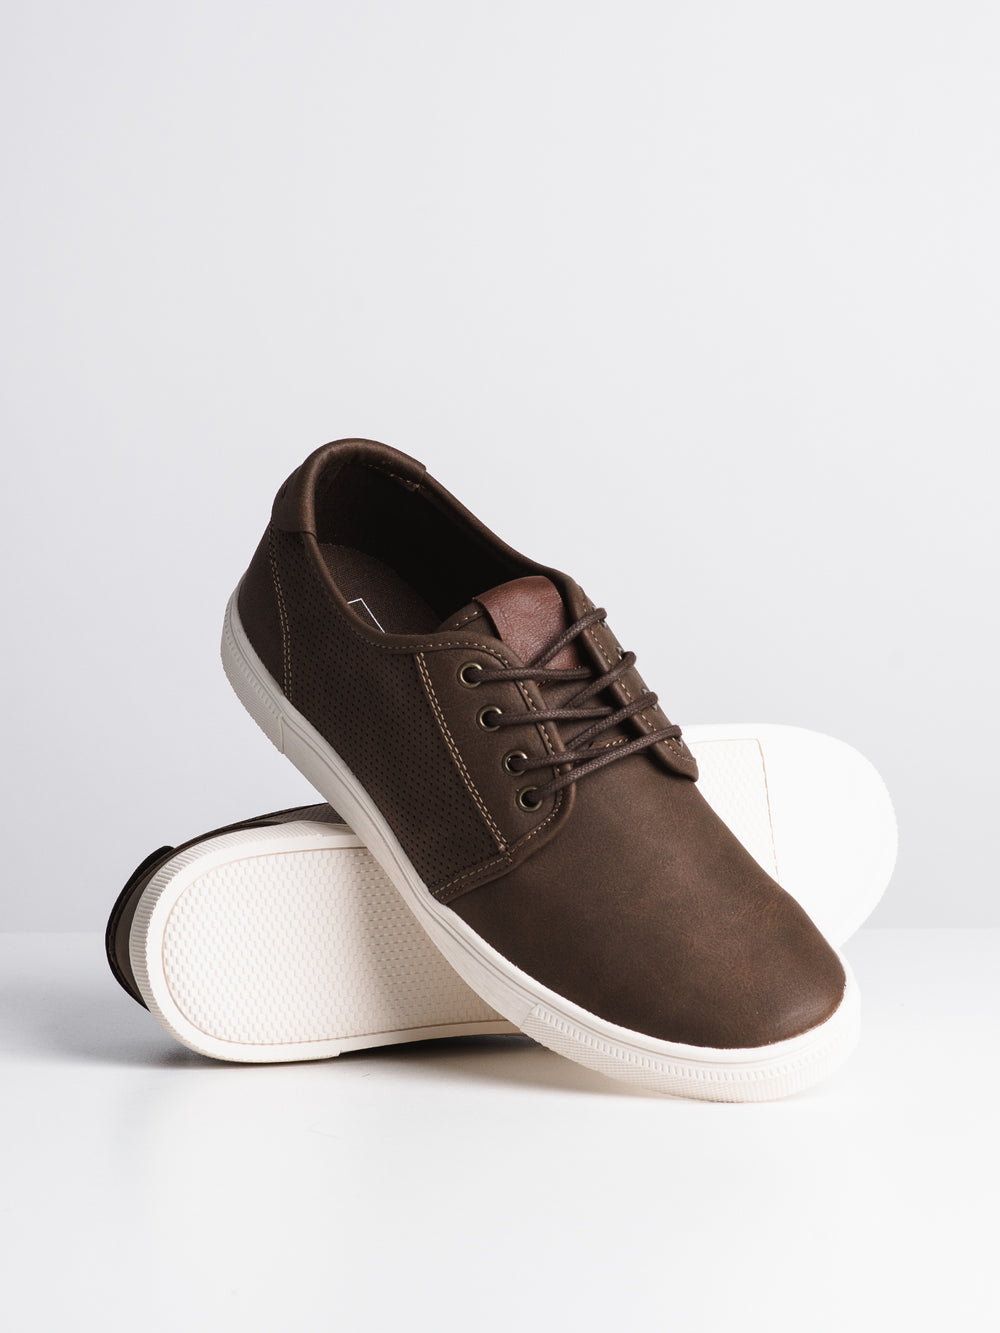 MENS COOPER - BROWN-D1 - CLEARANCE